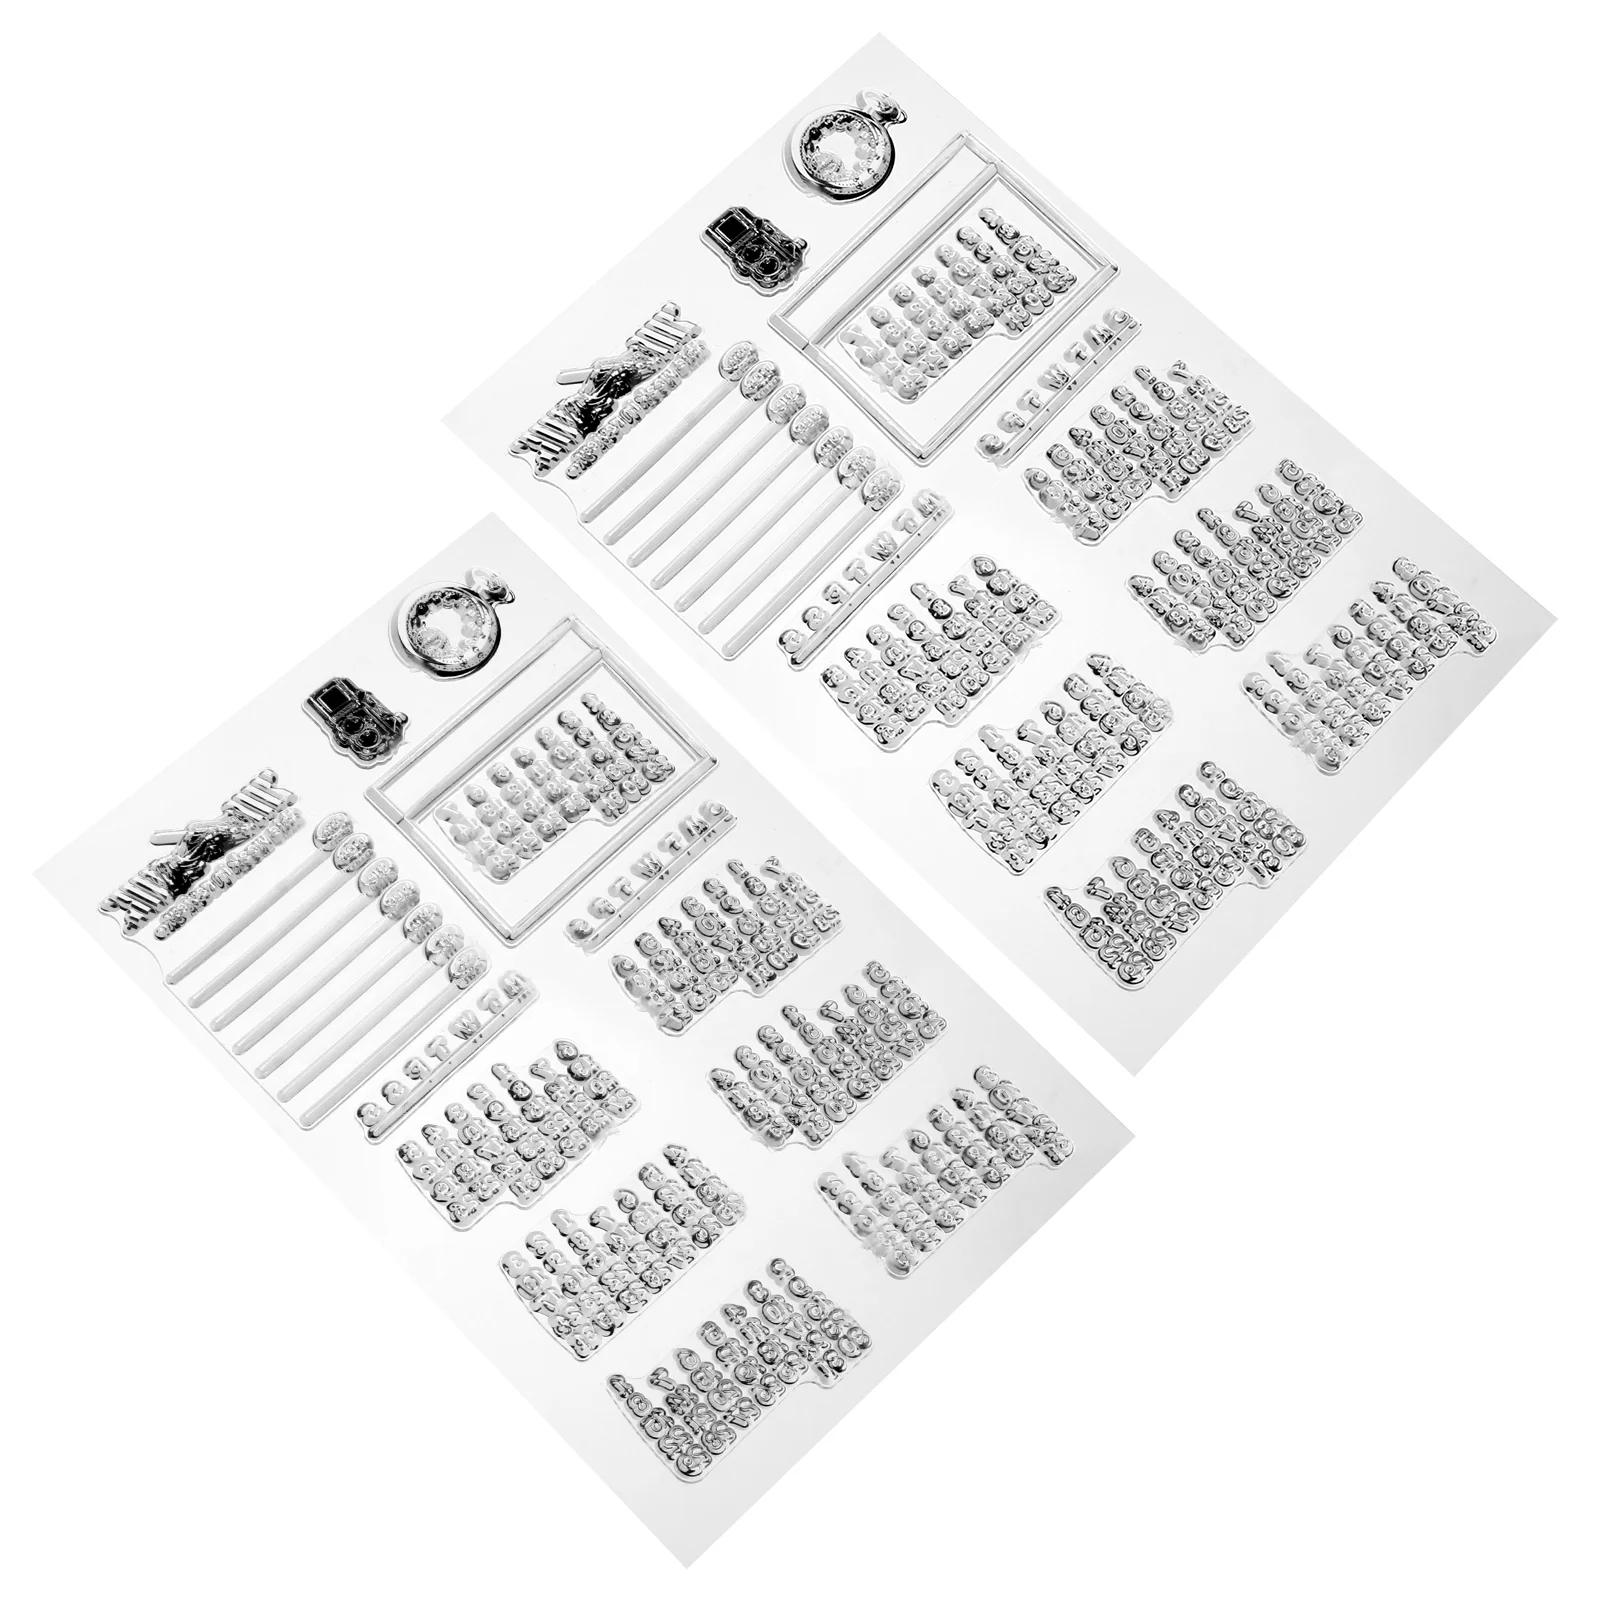 

2pcs Portable Calendar Date DIY Hand Ledger Album Diary Silicone Finished Stamp